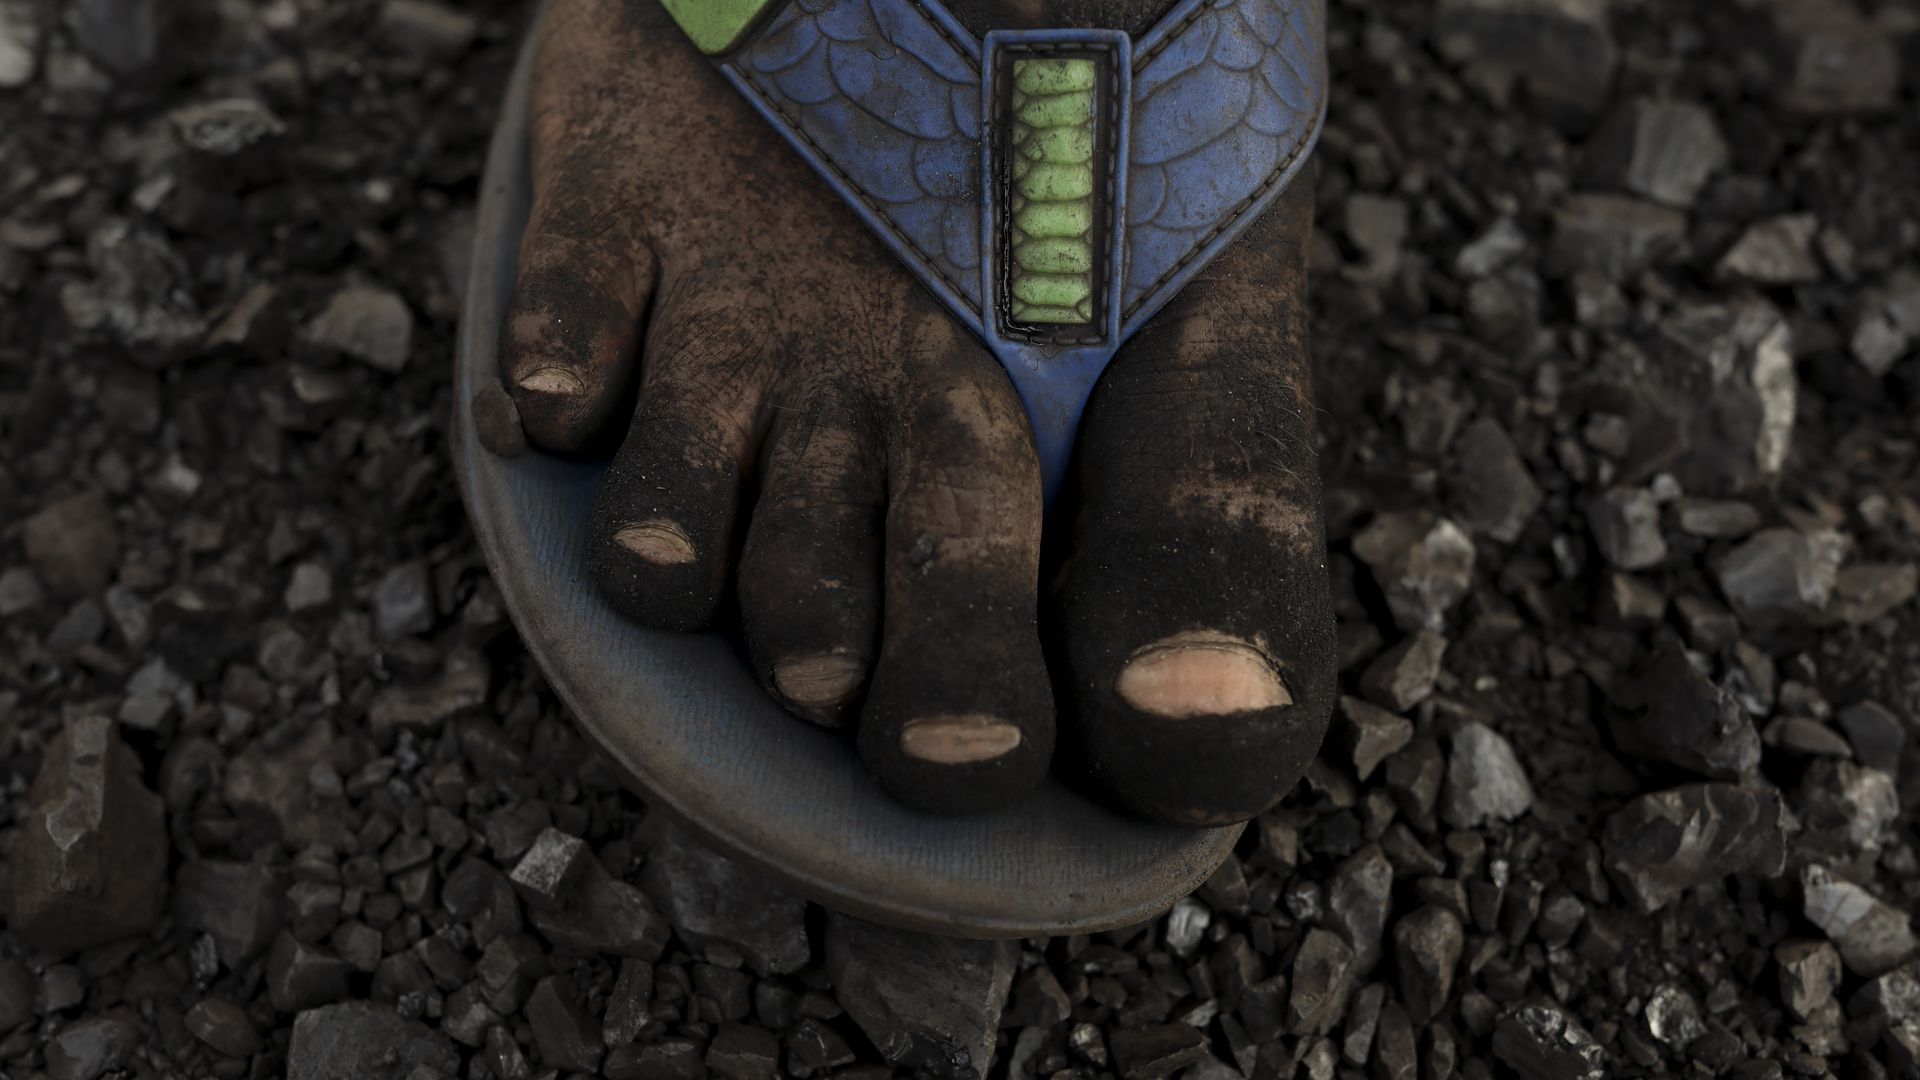 A foot view of labour how unload coal from a cargo ship in Gabtoli on the outskirts of Dhaka on January 9. After unloading 30 baskets of coal they earn around $1 USD.